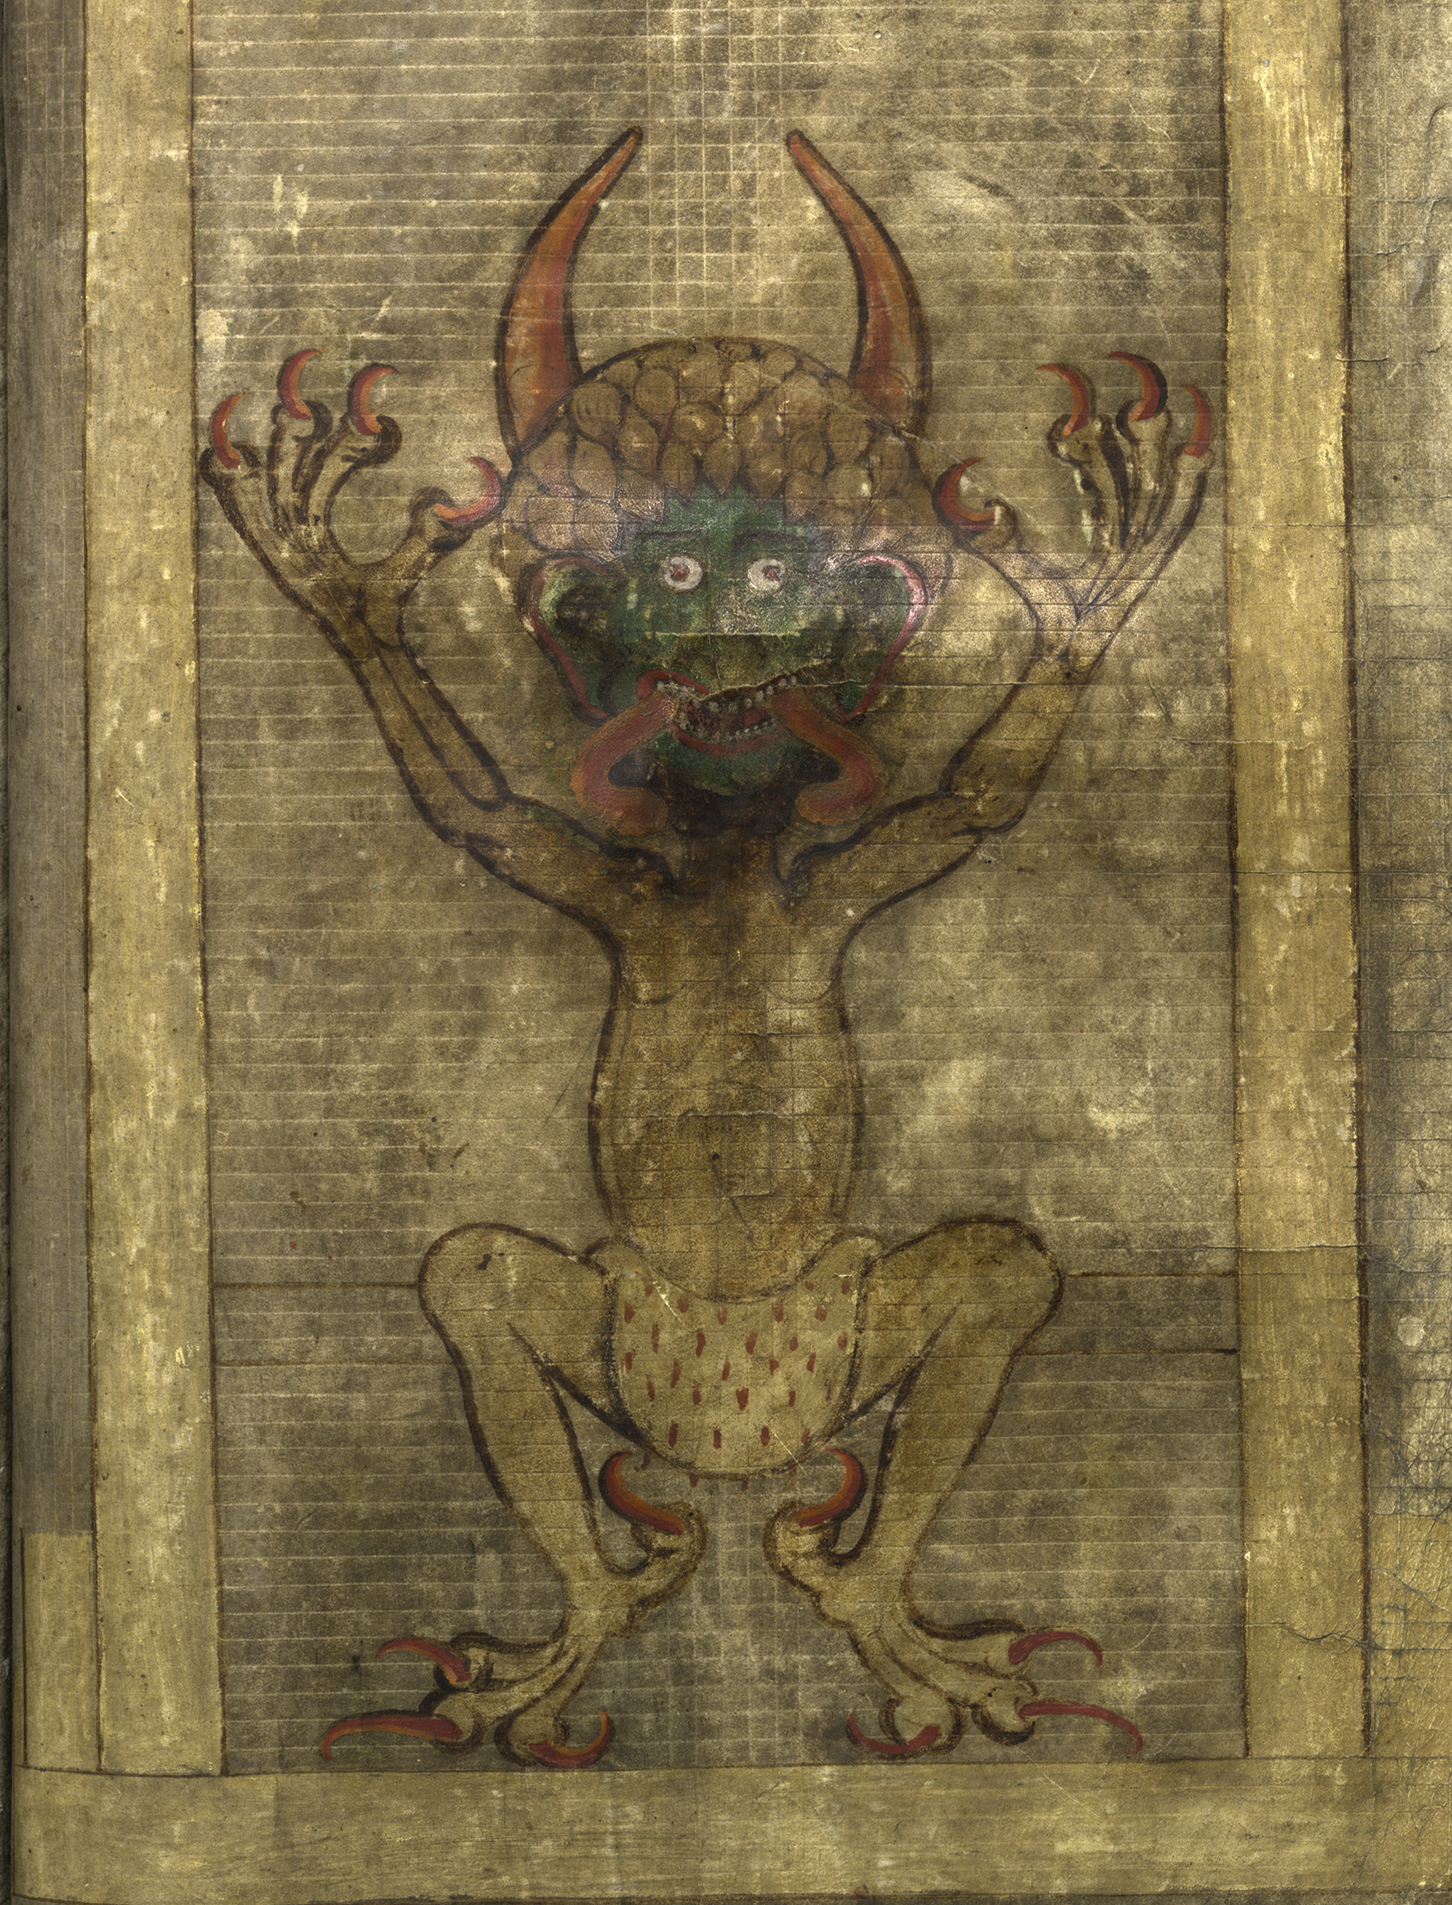 Painting on a book page of a devil with red claws and an outstretched tongue.